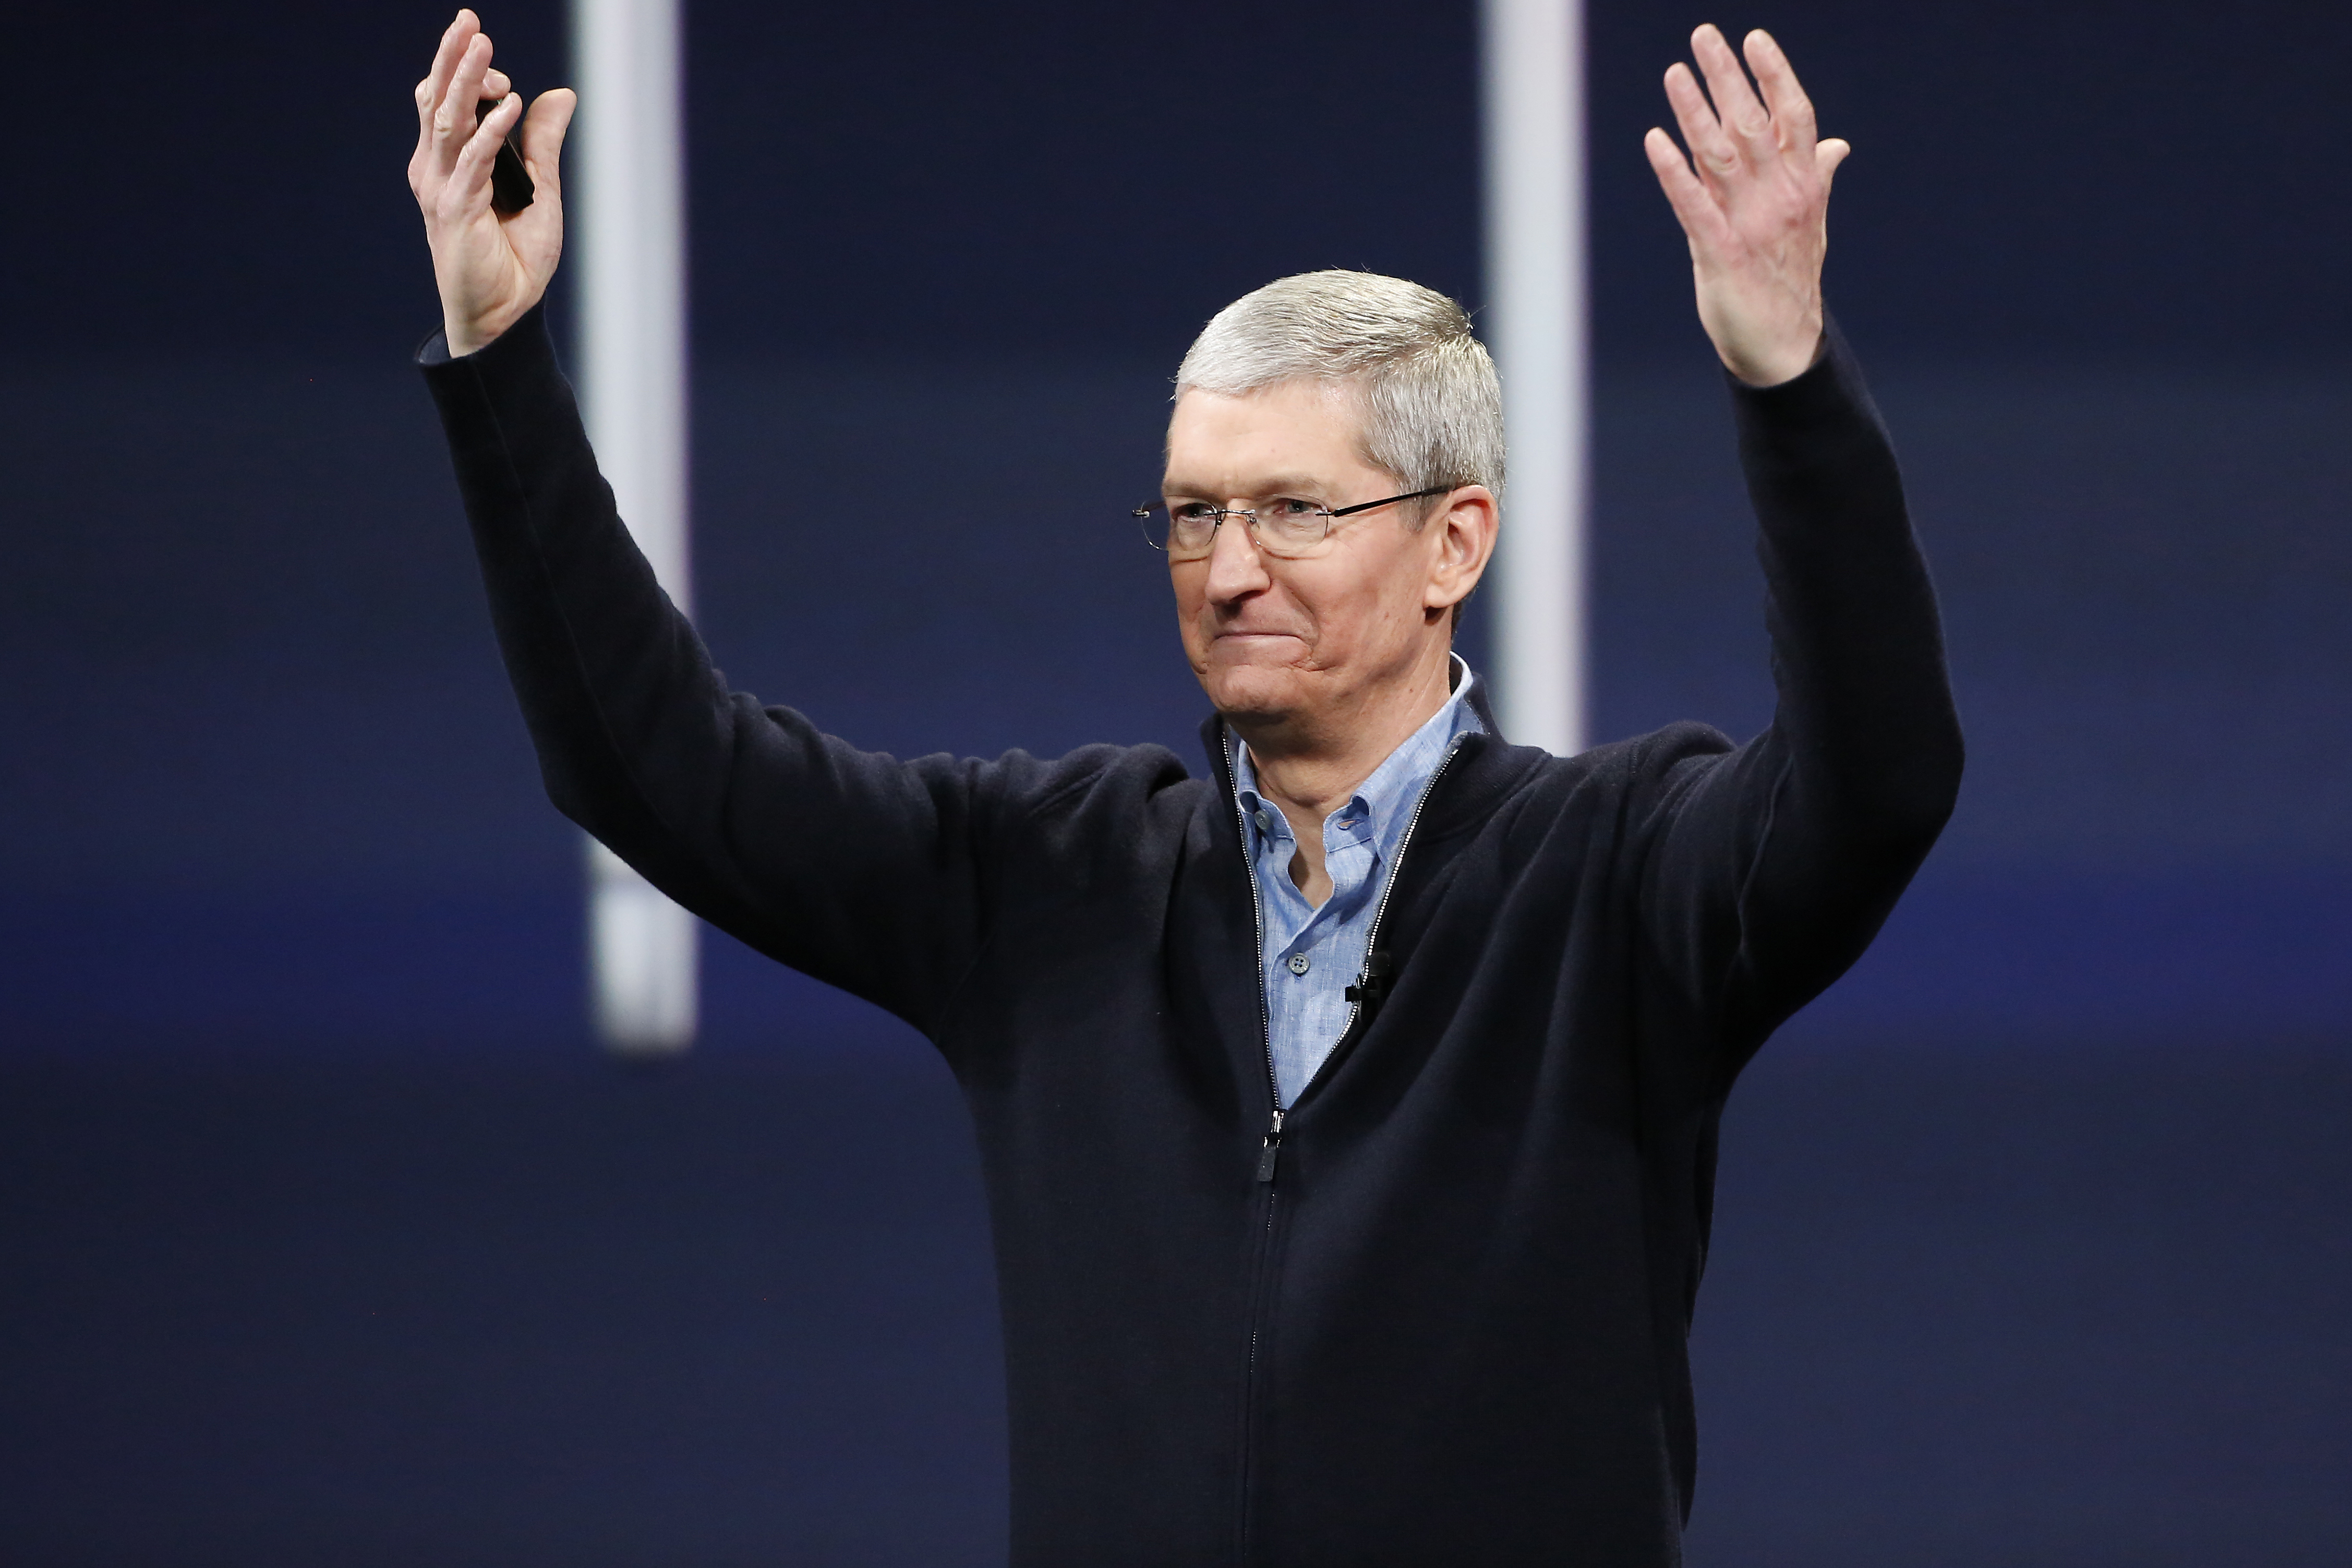 Apple CEO Tim Cook gestures on stage during an Apple special event at the Yerba Buena Center for the Arts on March 9, 2015 in San Francisco, California. (Stephen Lam&mdash;Getty Images)